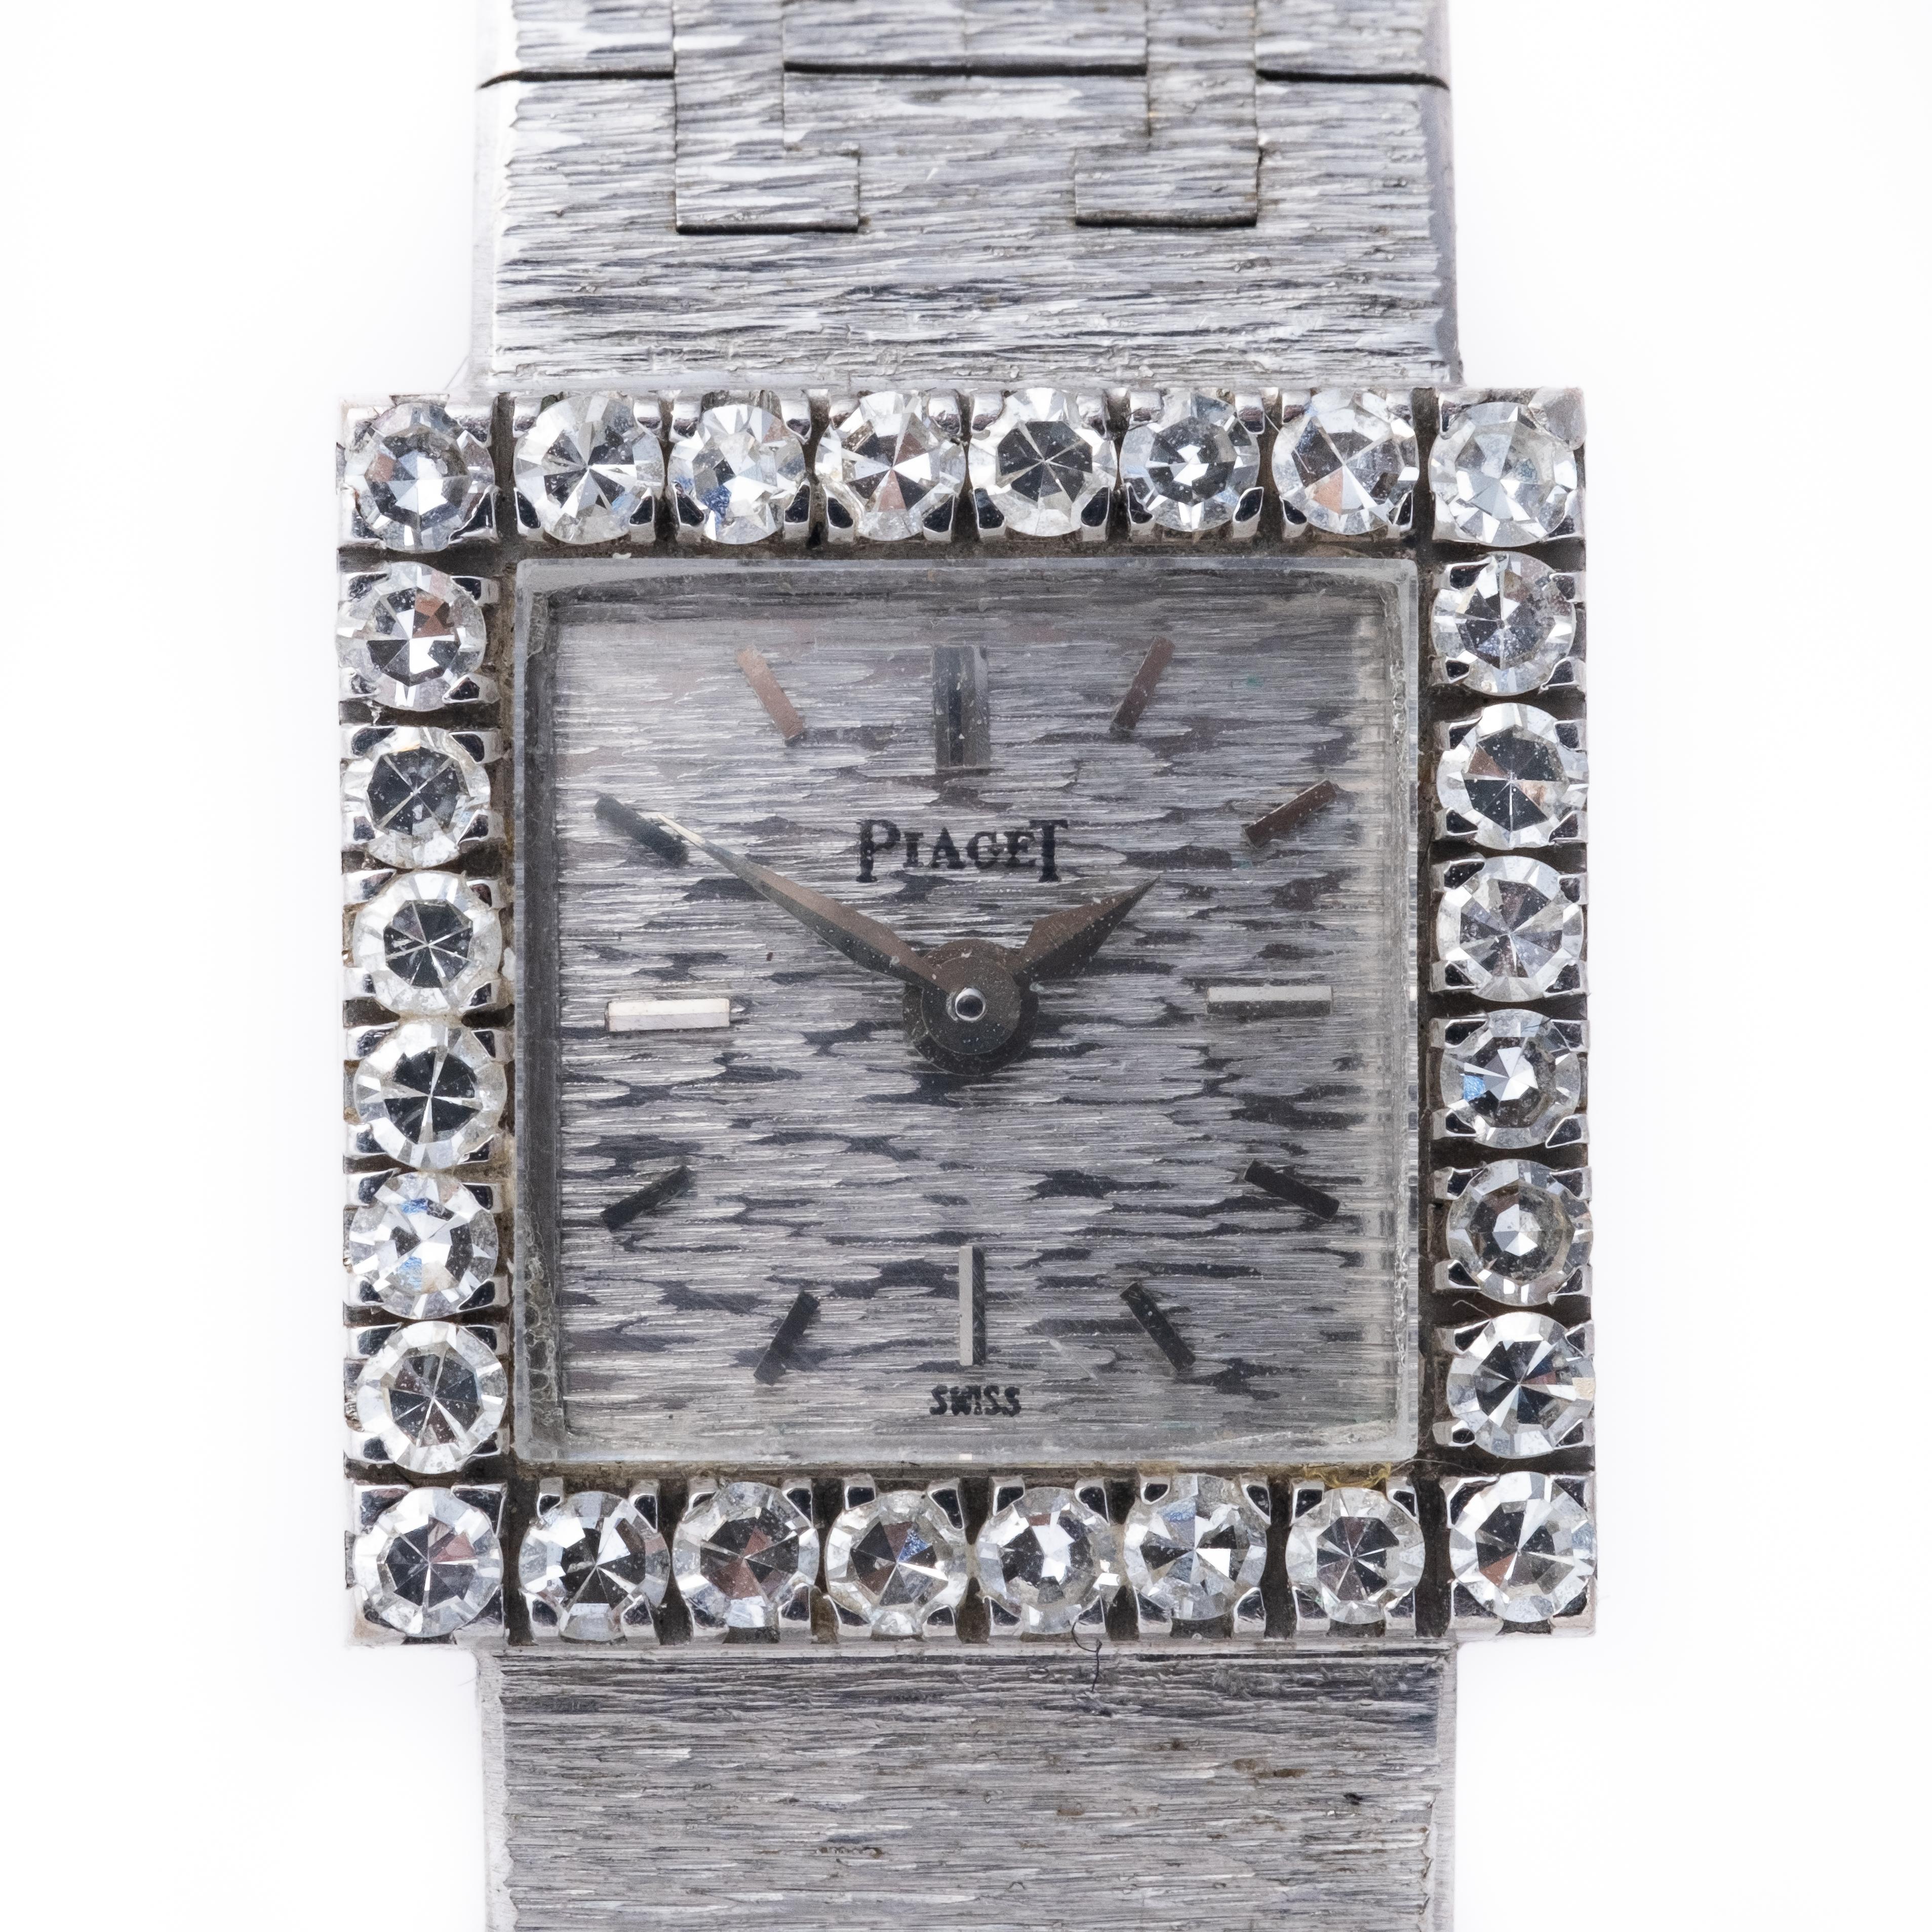 This is the classic piaget design diamond wristwatch .. The bezel is adorned with 28 single cut diamonds, and the dial has a textured finish and applied baton numerals. The watch is powered by a manual wind movement, and it comes with an integrated